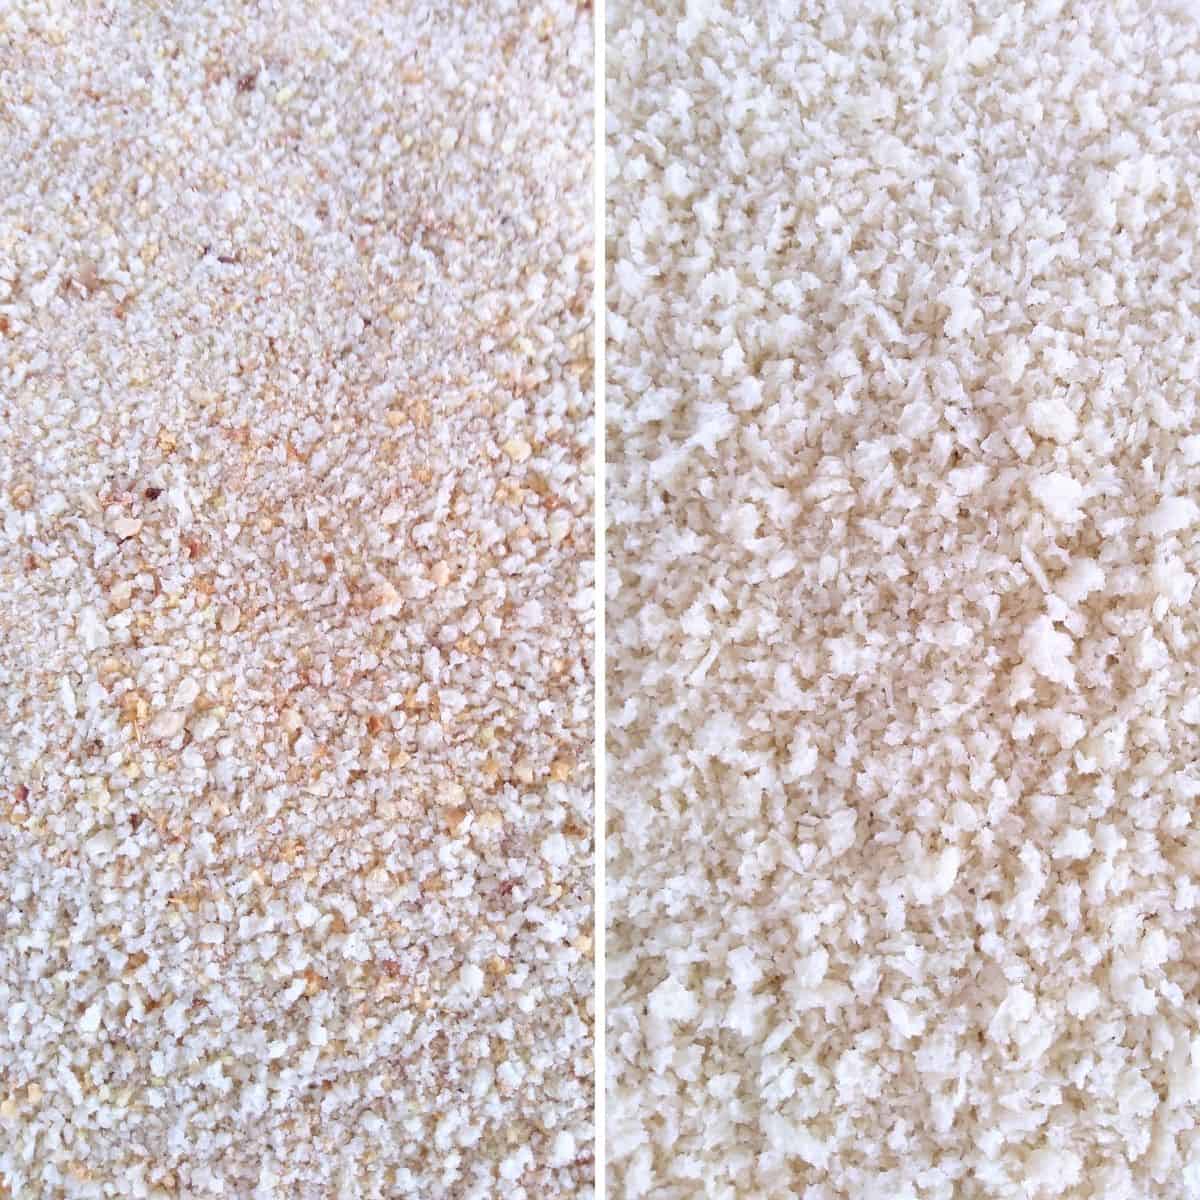 On the left is a close up of traditional bread crumbs. They are small and round with white and brown crumbs. On the right is a close up of Panko breadcrumbs that are completely all white, the crumbs are not as uniform and are more jagged. 